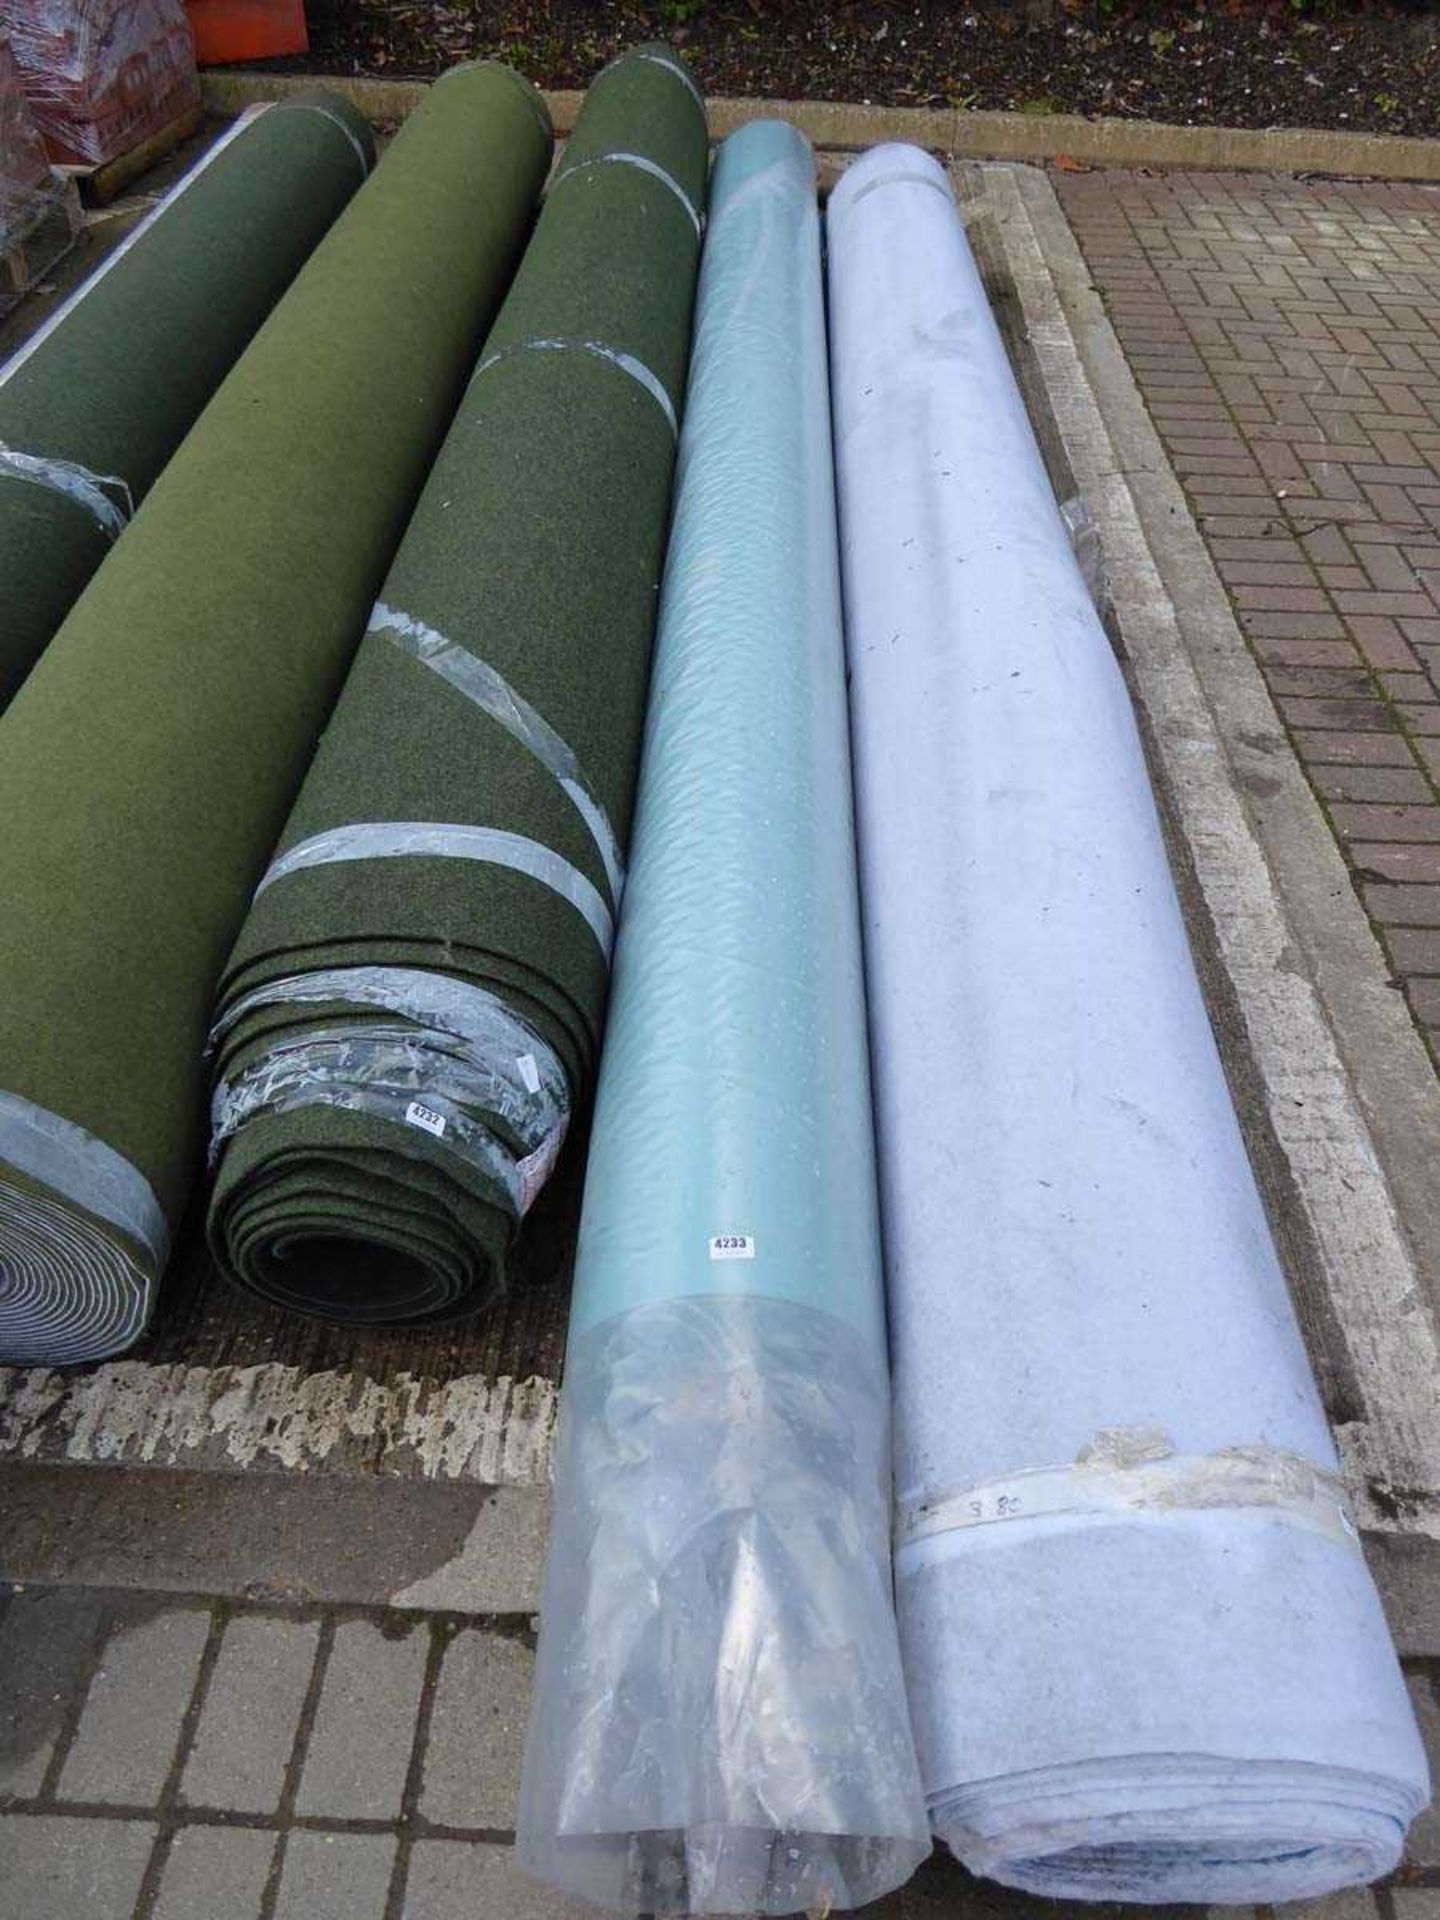 Large roll of industrial style green carpet